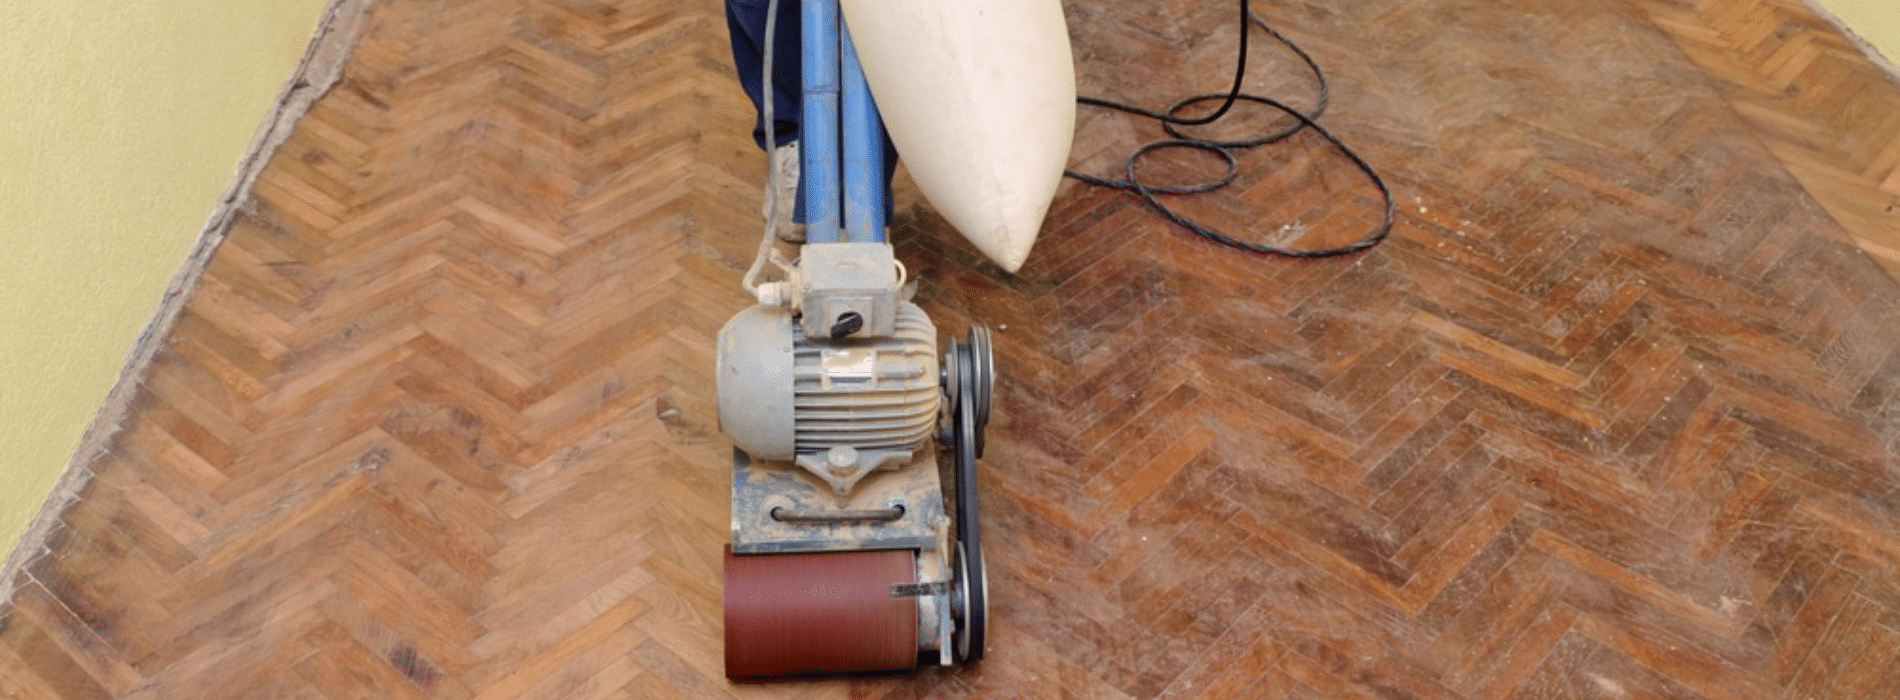 Mr Sander® in Emerson Park, RM1, employ the powerful Bona Belt Effect sander (2.2 kW) to sand herringbone floors. Operating at 230V and 50Hz/60Hz, this 250x750 mm sander is connected to a dust extraction system featuring a HEPA filter, guaranteeing a thorough and efficient result.